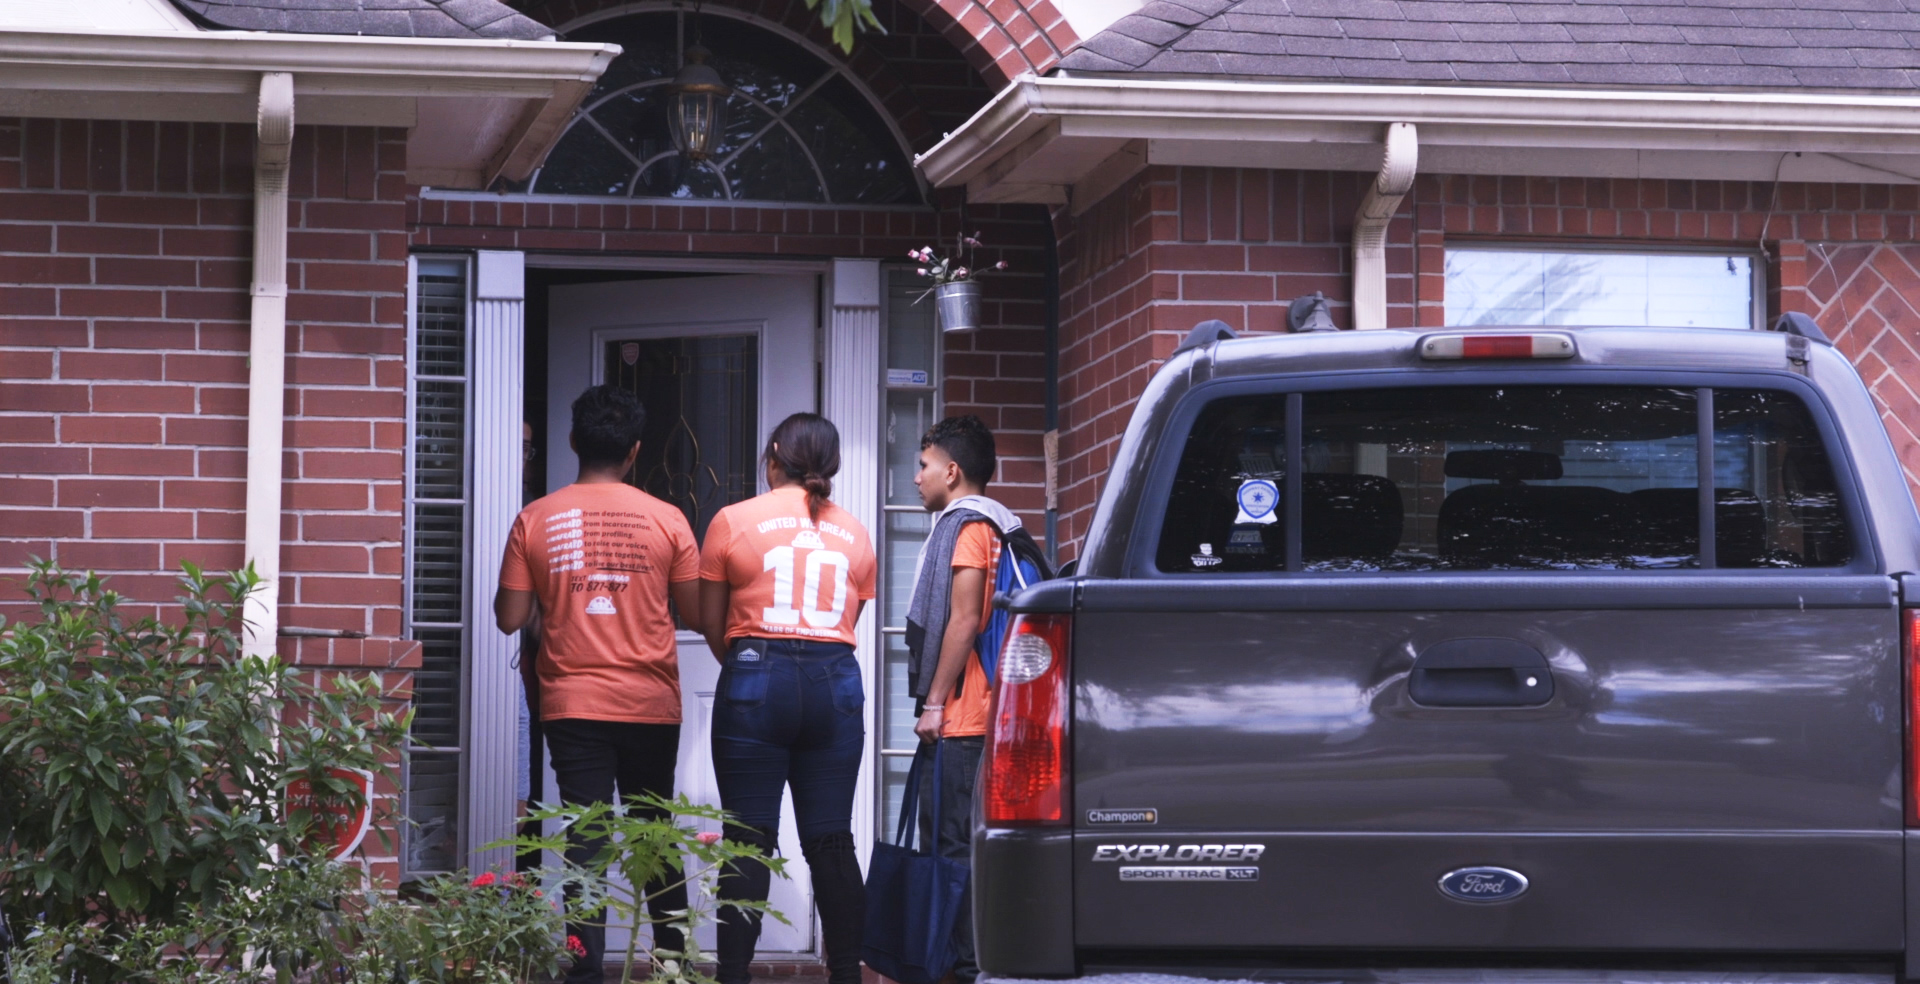 PHOTO: United We Dream volunteers canvass Houston, knocking on doors asking residents to vote.